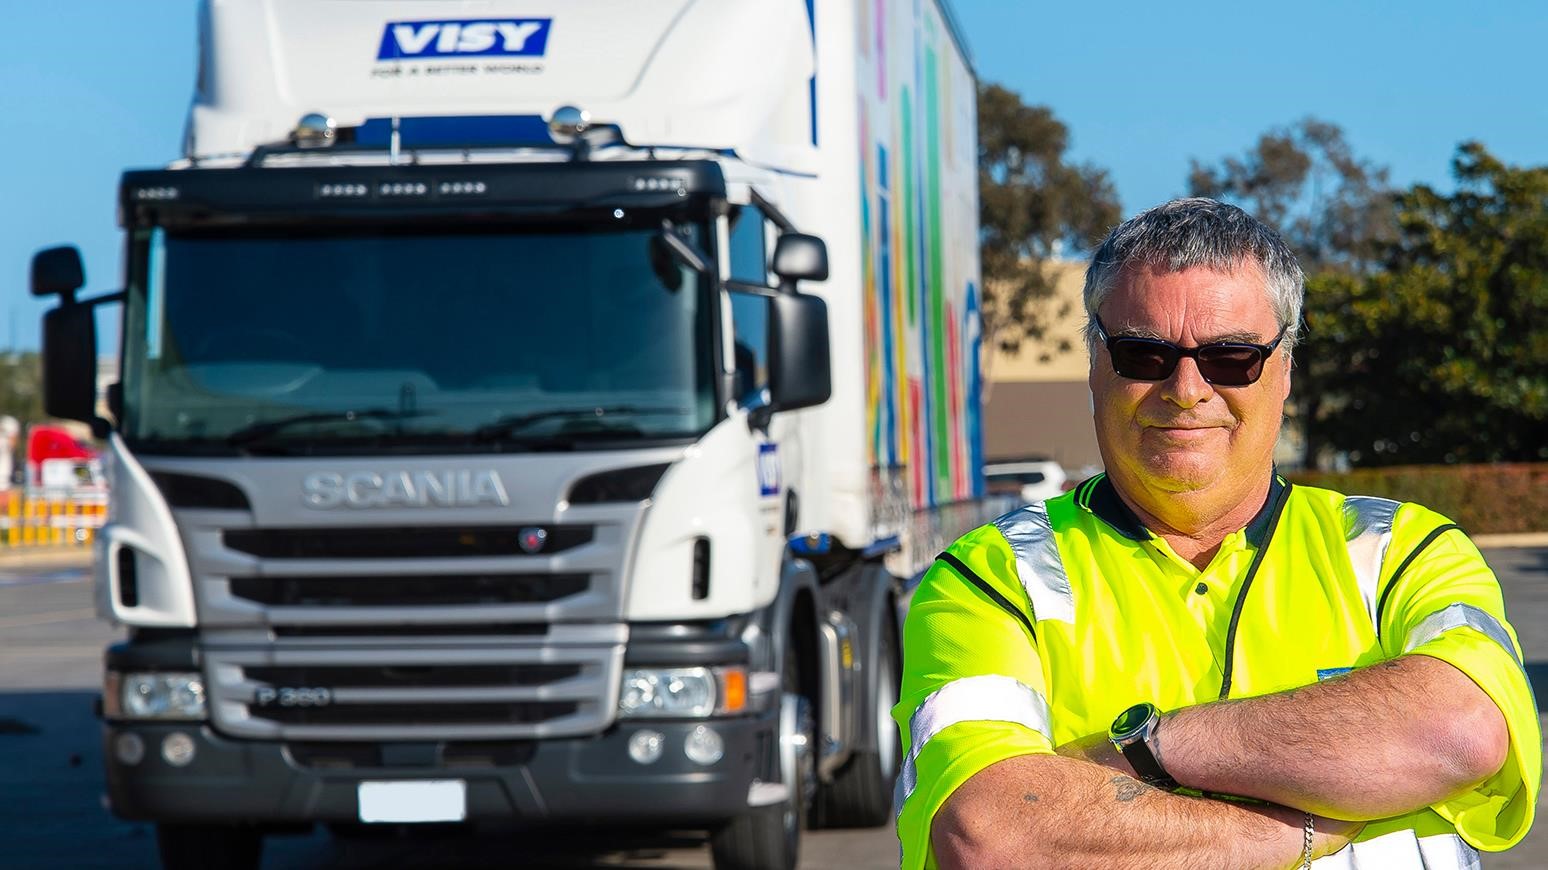 Driver Earns High Marks With The Scania Driver Support System